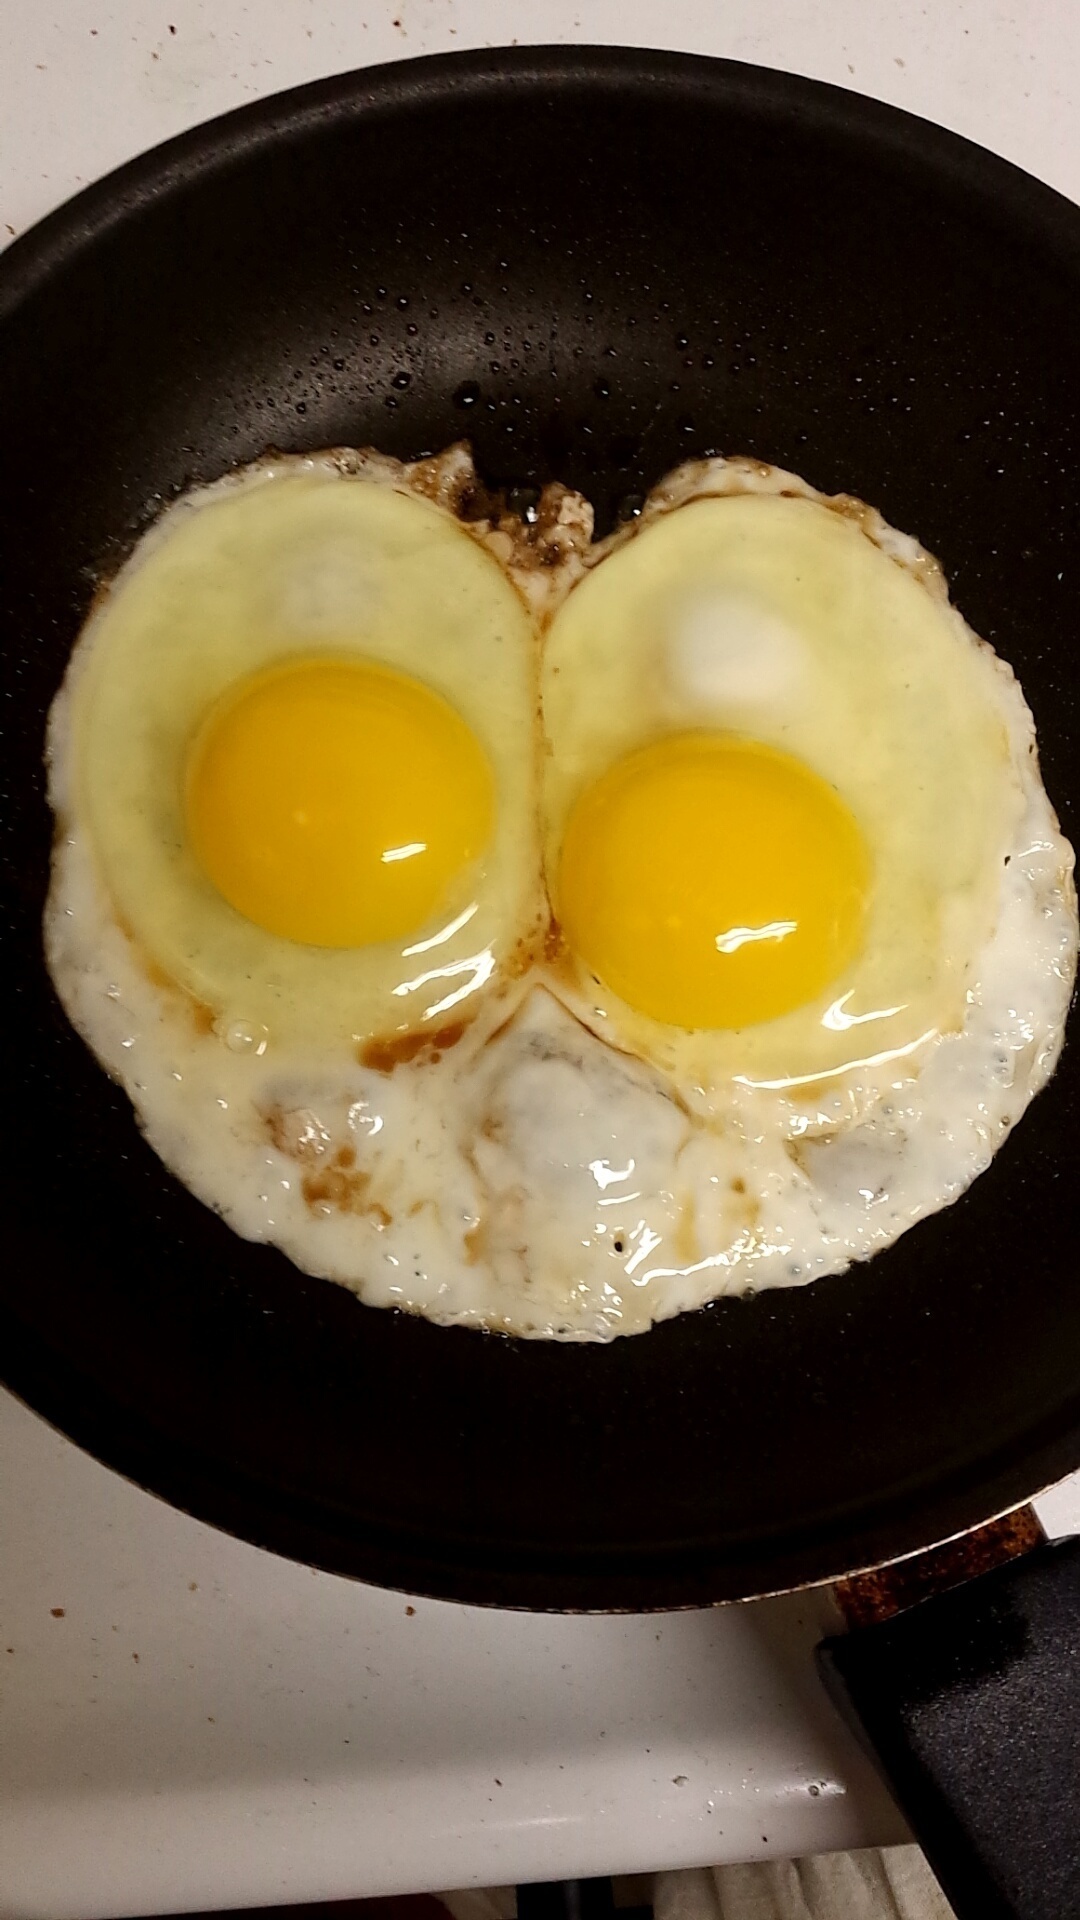 These eggs eerily resemble a surprised owl.